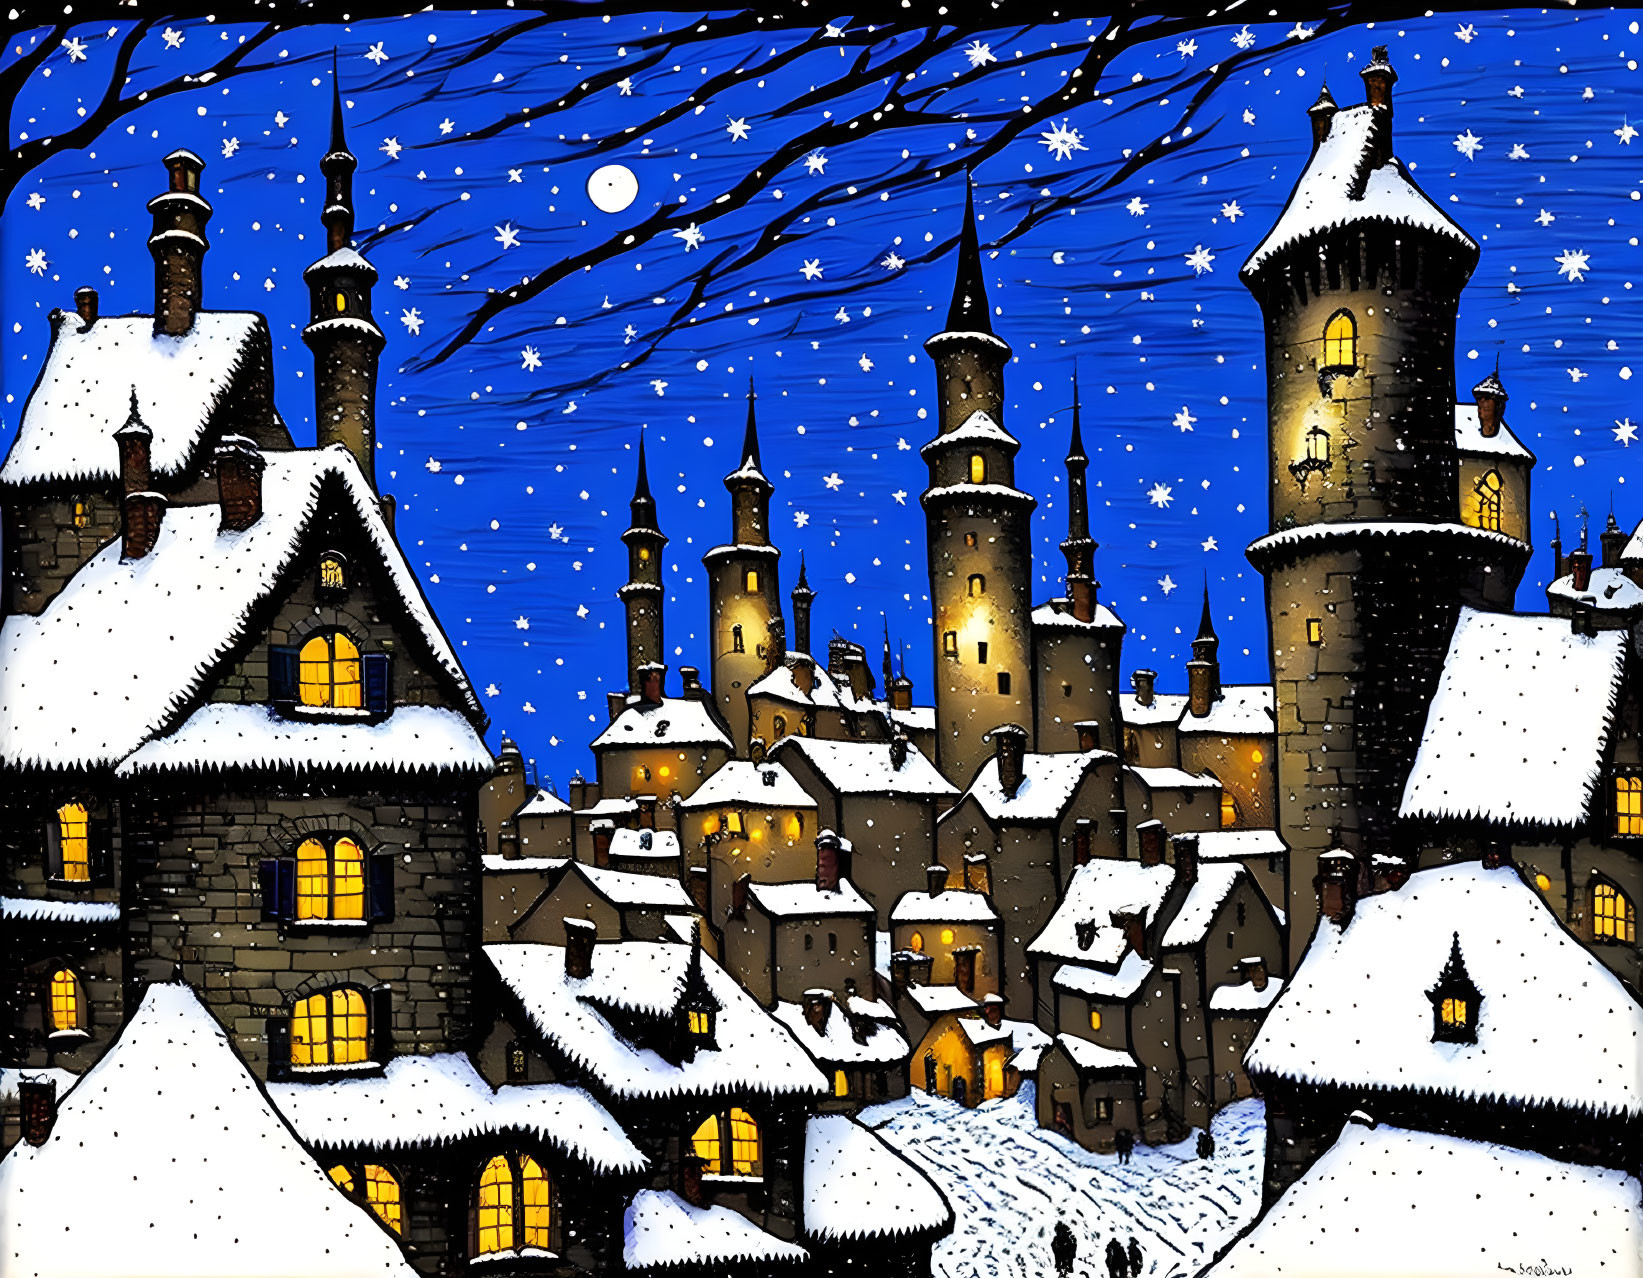 Magic night in a medieval town.